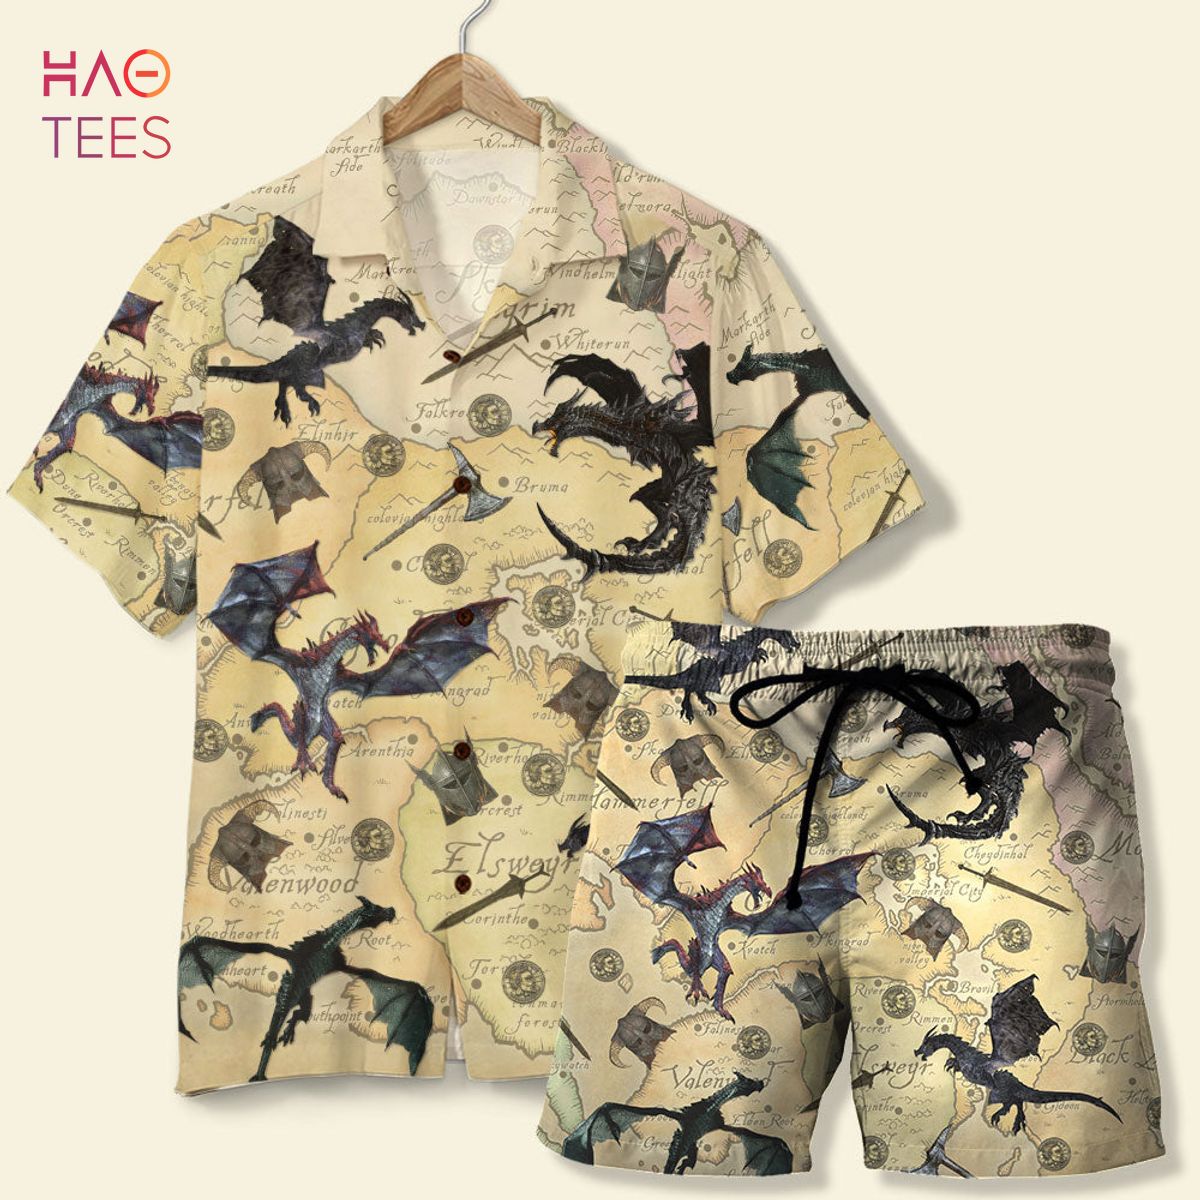 Skyrim The Game with Dragons and Old Tamriel Map Pattern Hawaiian Shirt